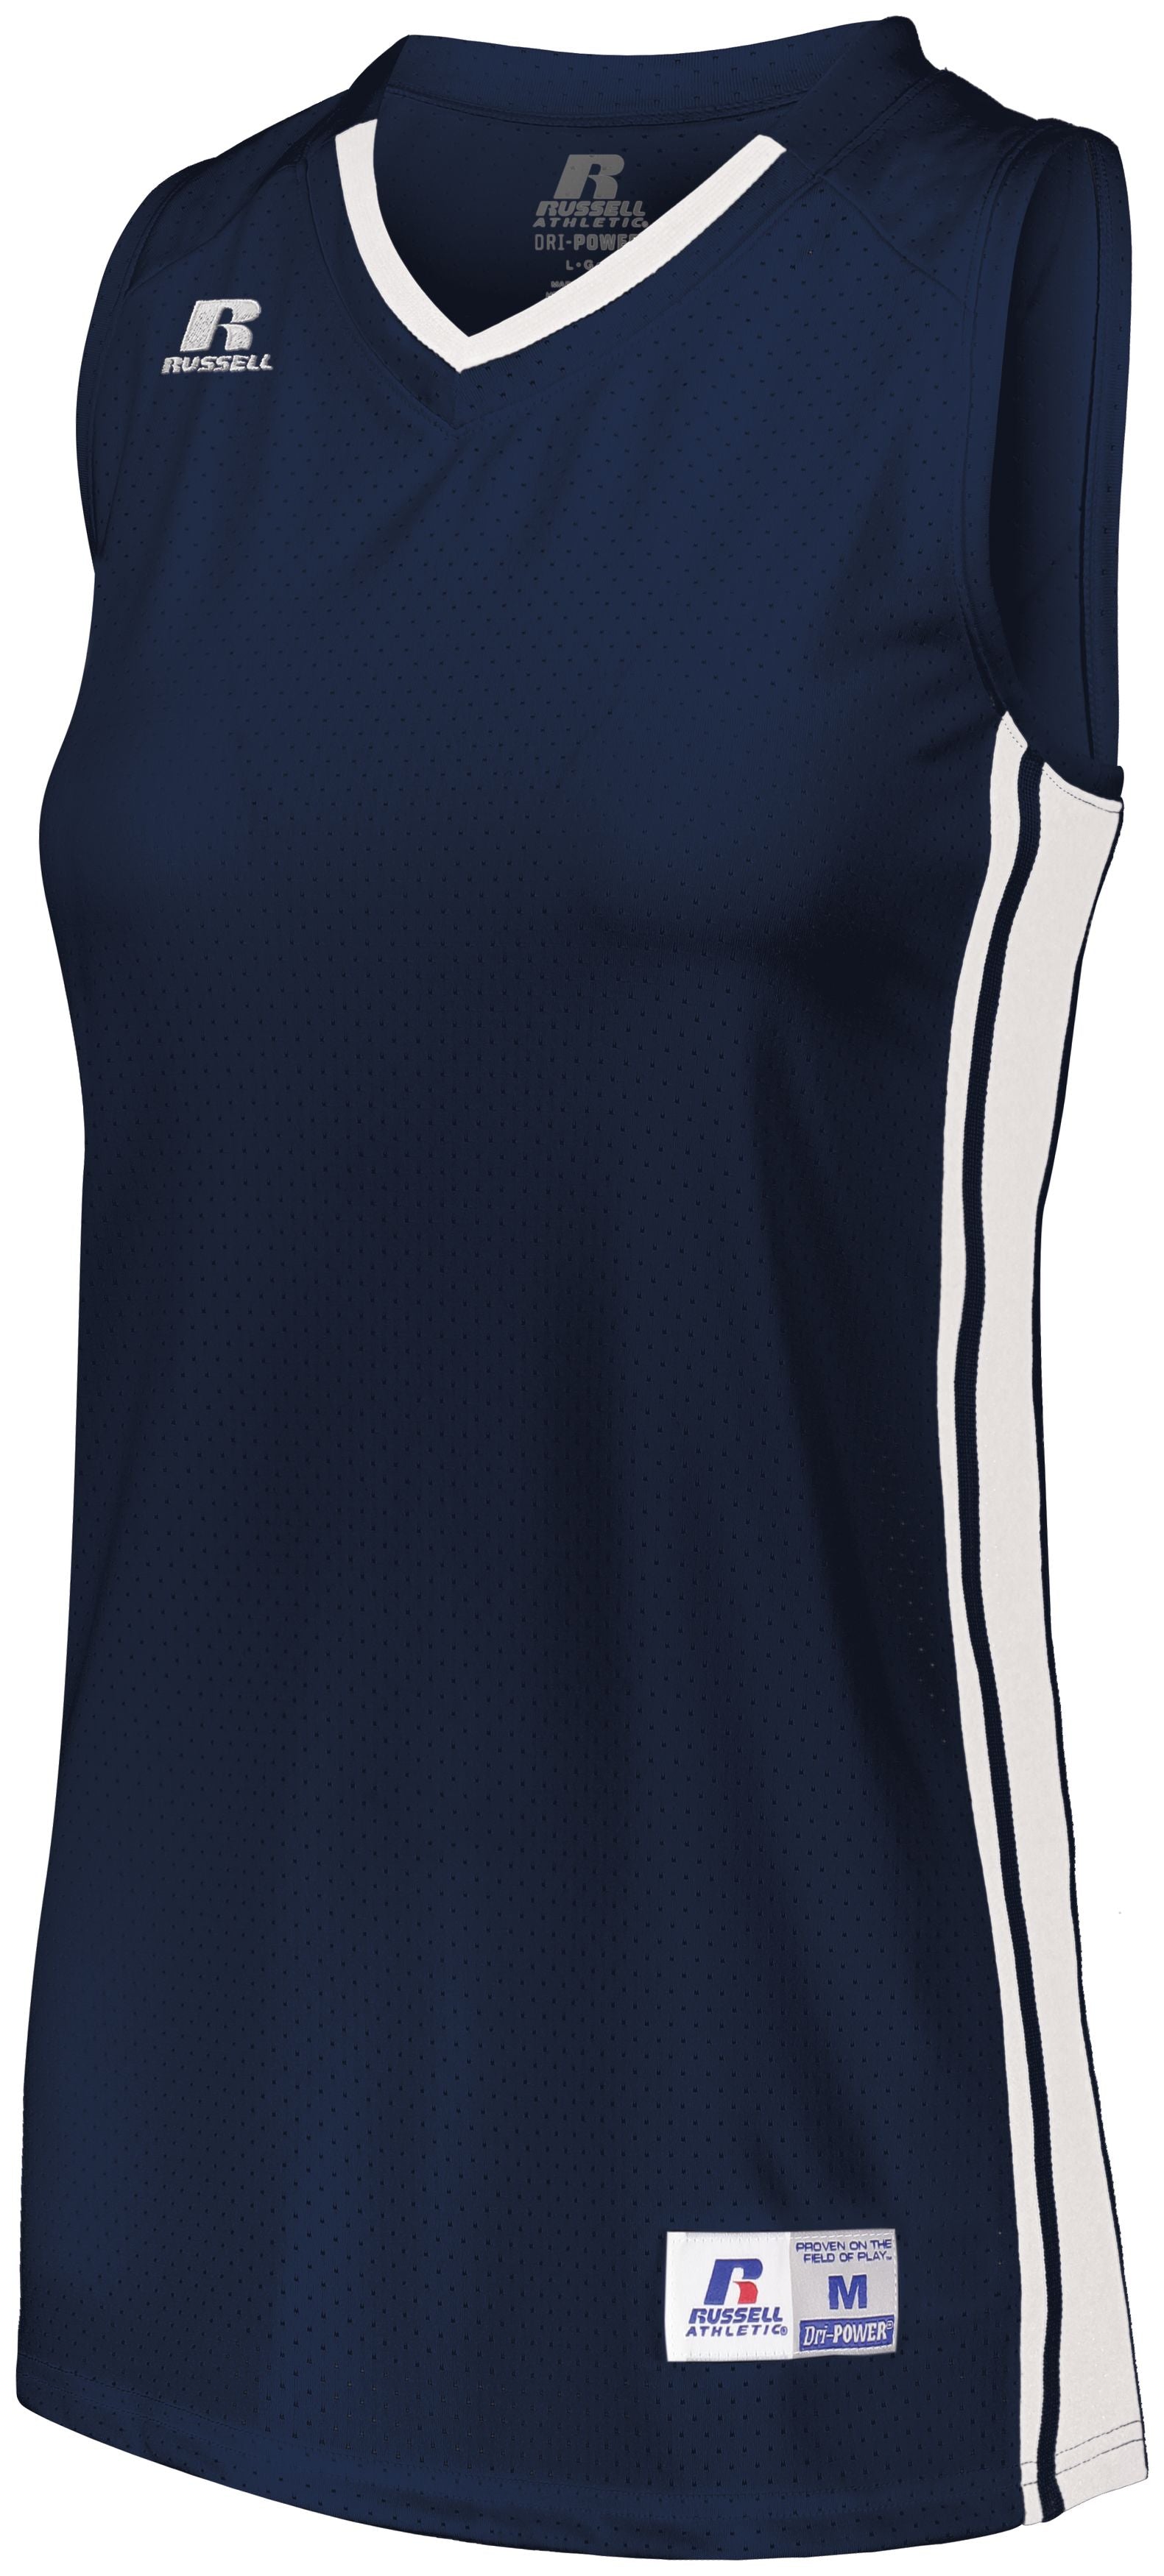 Russell Athletic Ladies Legacy Basketball Jersey in Navy/White  -Part of the Ladies, Ladies-Jersey, Basketball, Russell-Athletic-Products, Shirts, All-Sports, All-Sports-1 product lines at KanaleyCreations.com